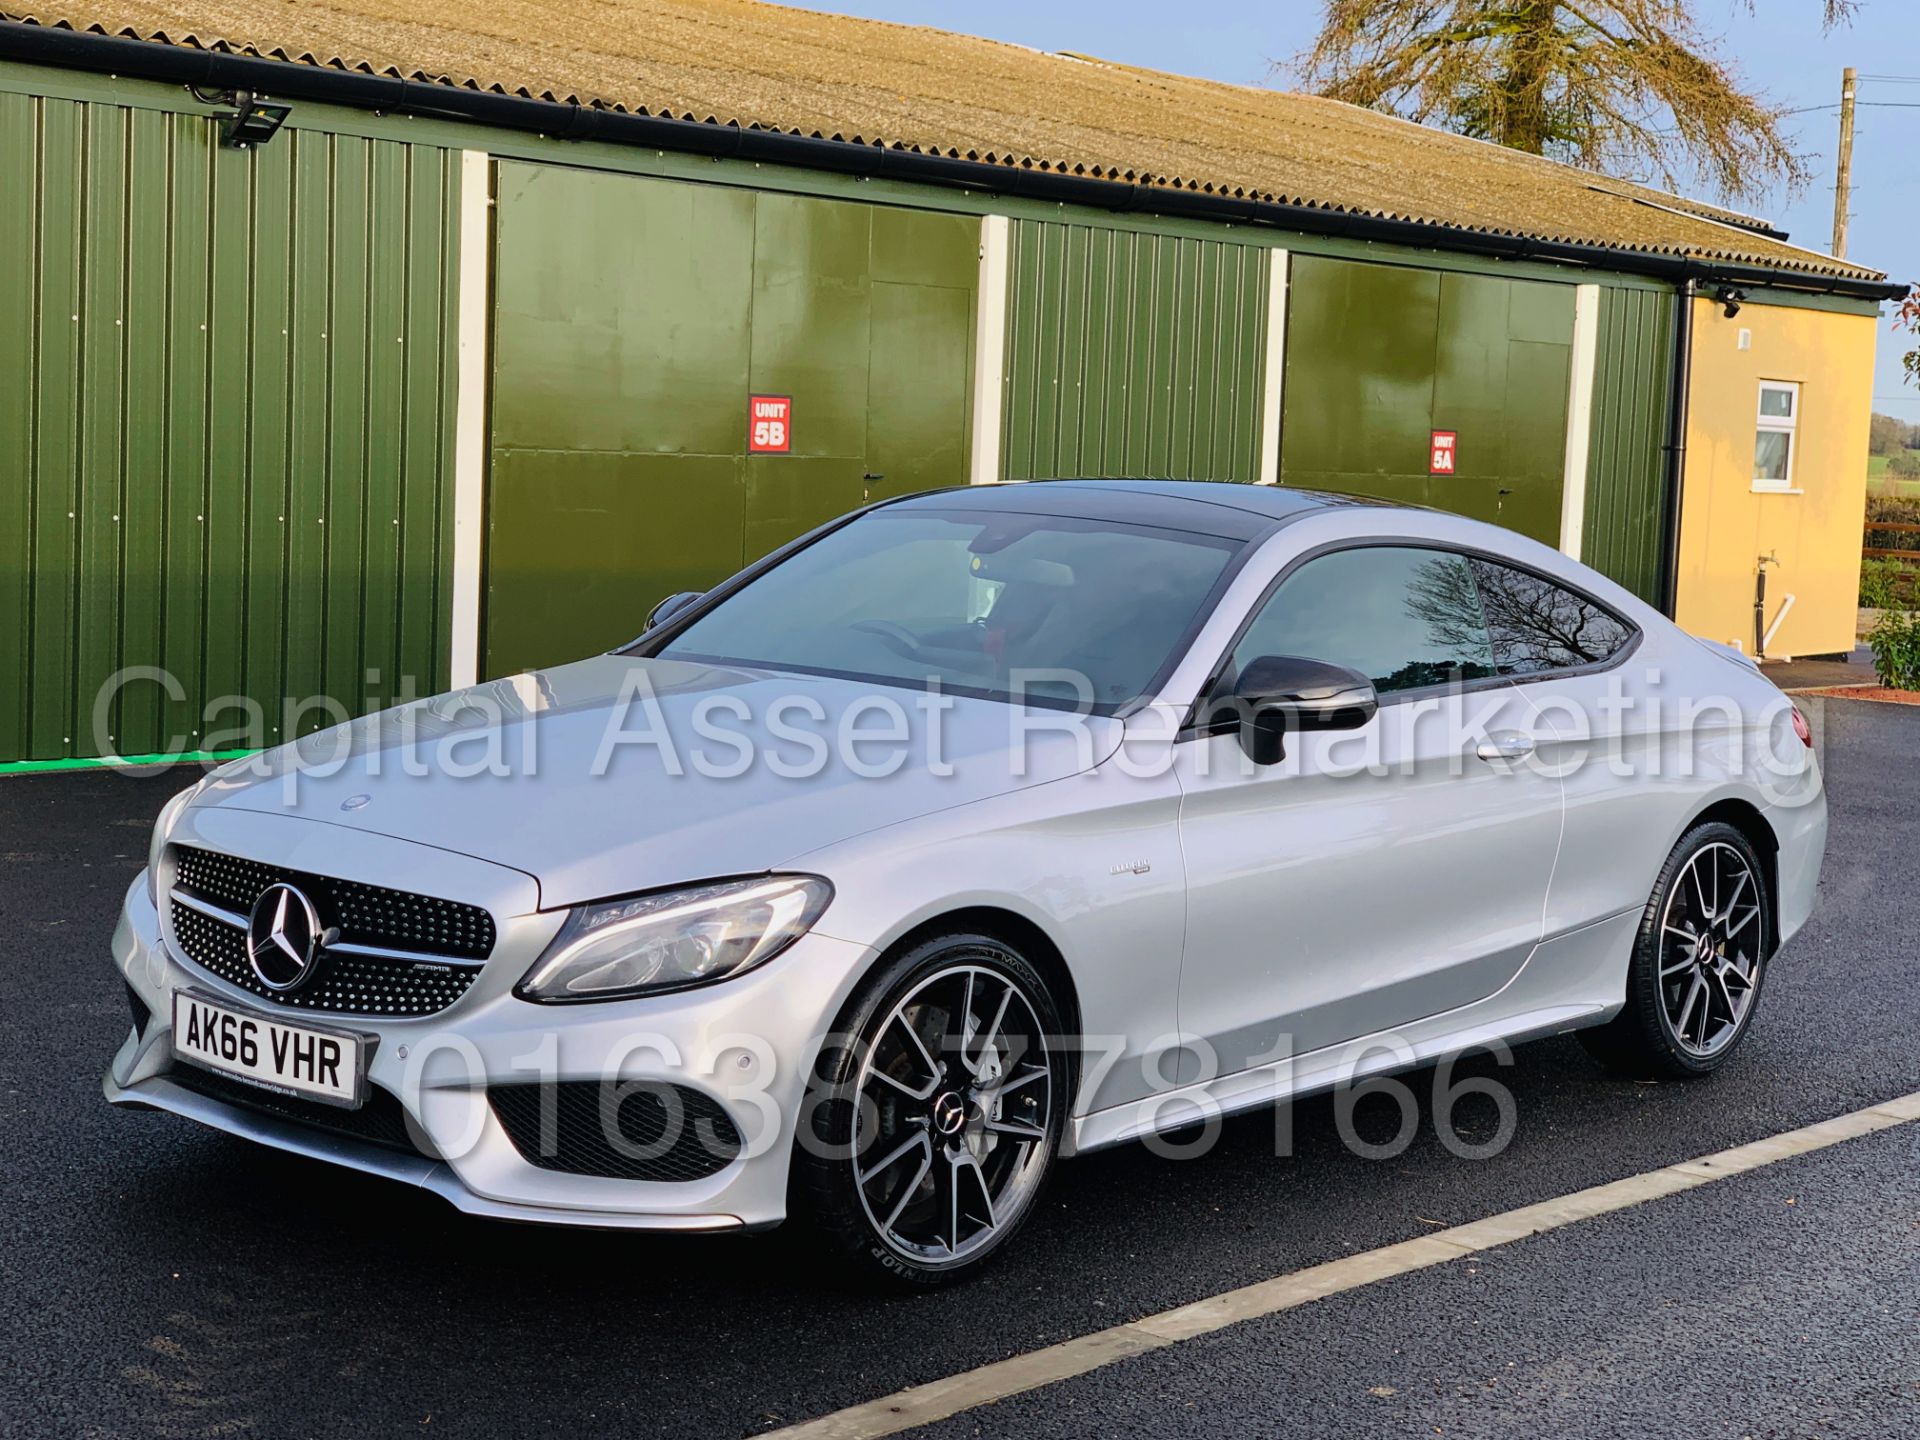 MERCEDES-BENZ C43 AMG *PREMIUM 4 MATIC* COUPE (2017) '9-G AUTO - LEATHER - SAT NAV' **FULLY LOADED** - Image 6 of 67